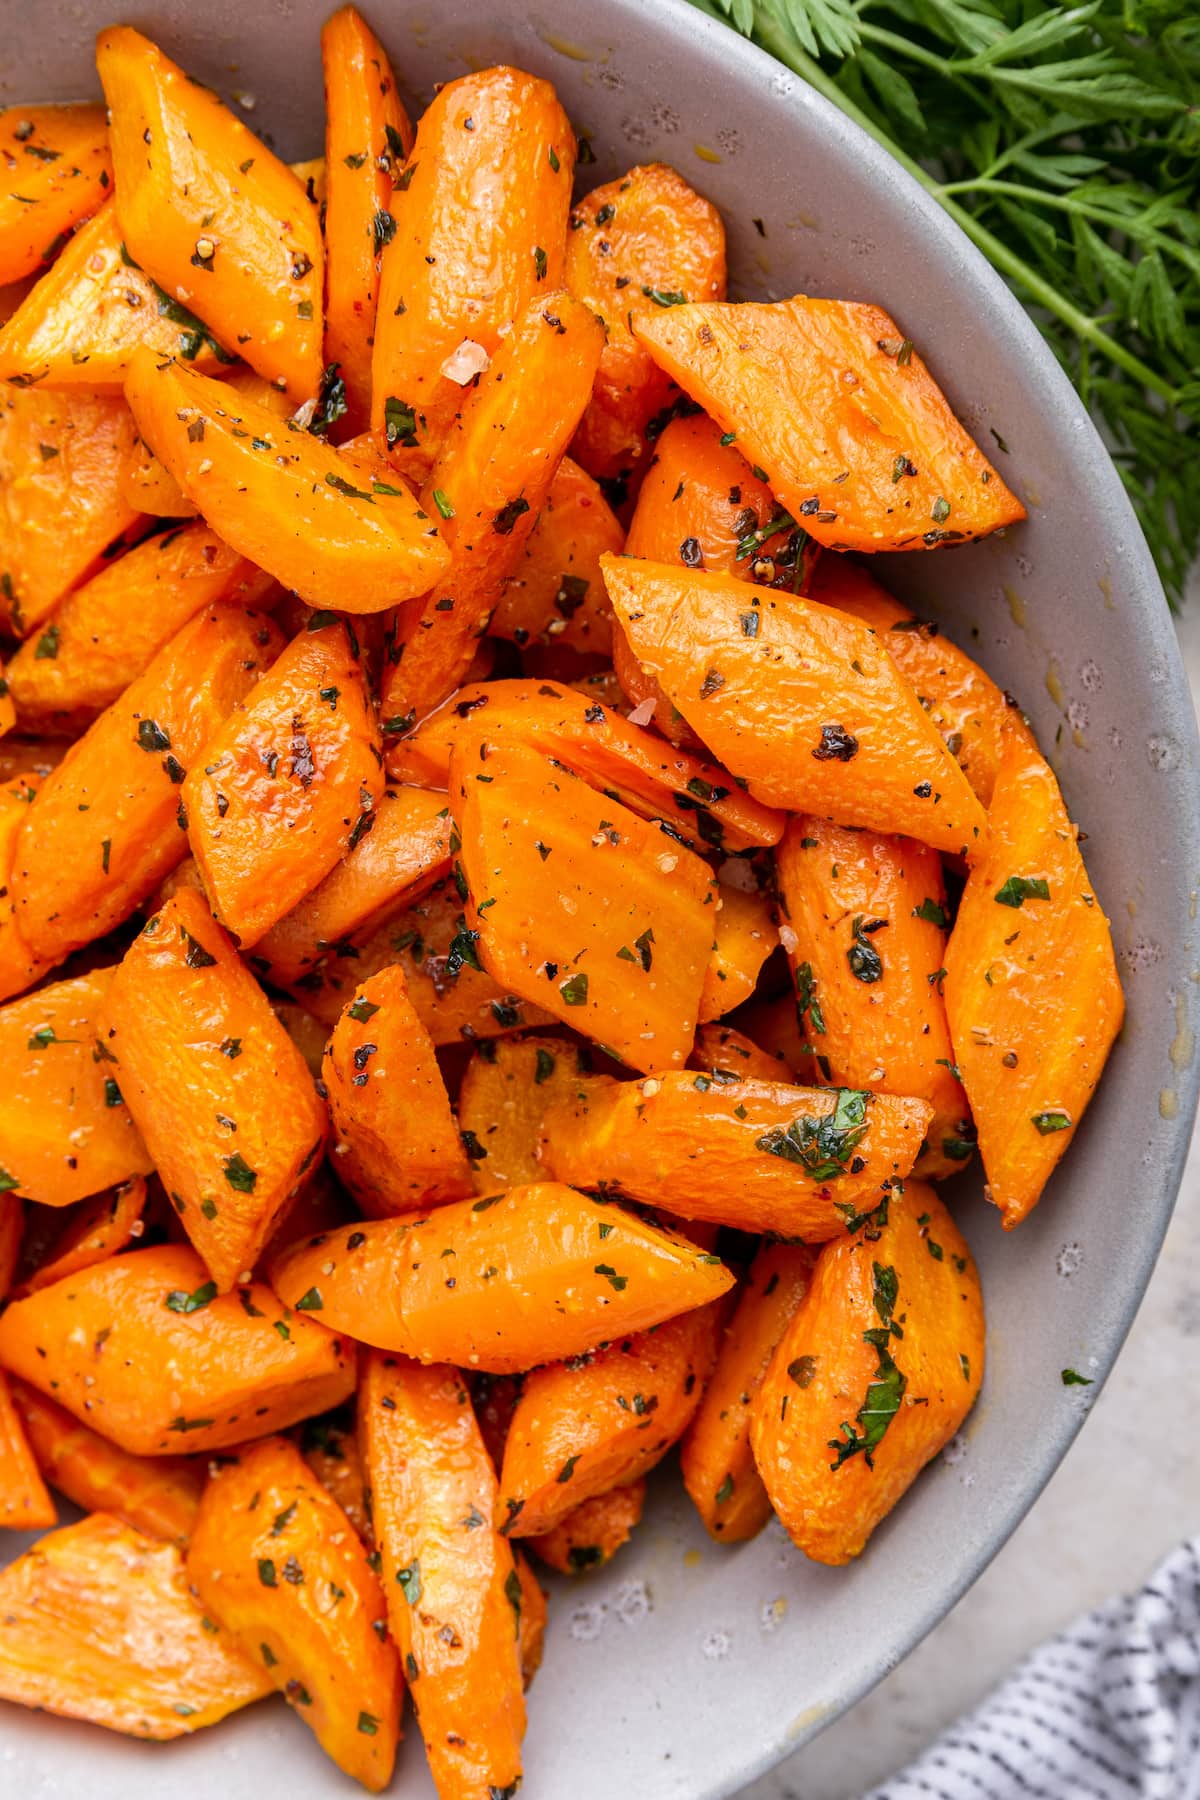 Roasted carrots in a bowl.